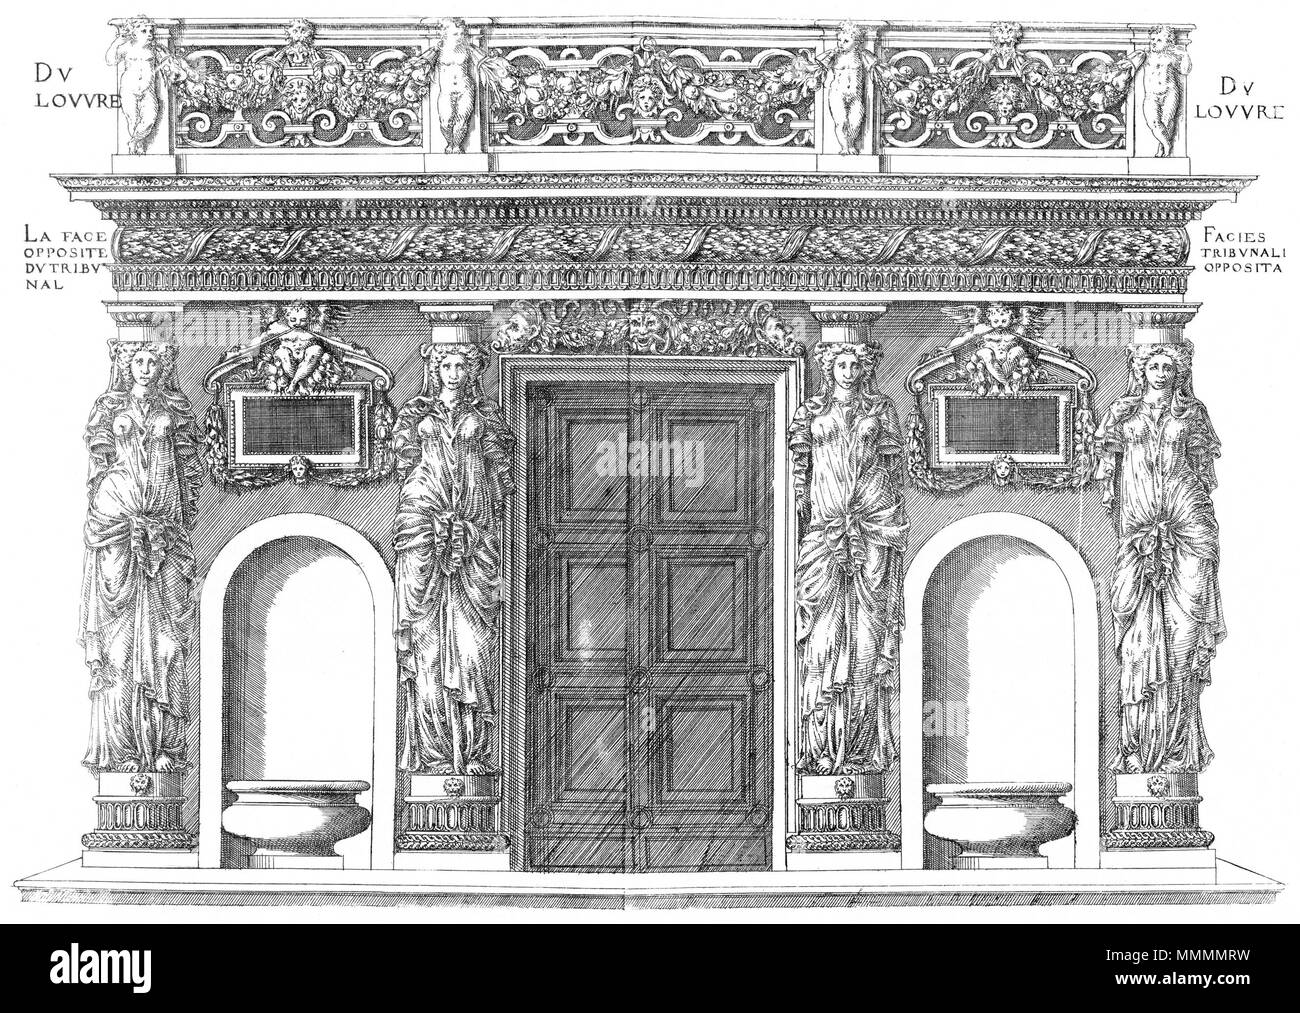 . English: Engraving from Le premier volume des plus excellents Bastiments de France by Jacques I Androuet du Cerceau, showing the four caryatids sculpted by Jean Goujon in what is now called the Salle des Caryatides in the west wing (Aile Lescot) of the Louvre Palace  . 21 May 2014, 11:55:19. Sculptor :   Jean Goujon  (1511–1567)      Alternative names Jean Goujeon; J. Goujon; Jean Gougeon; J. Gougeon; Jean Gouyon  Description French architect, sculptor, drawer and engraver  Date of birth/death circa 1510 after 1572  Location of birth/death Possibly Normandy Possibly Bologna  Work location Éc Stock Photo